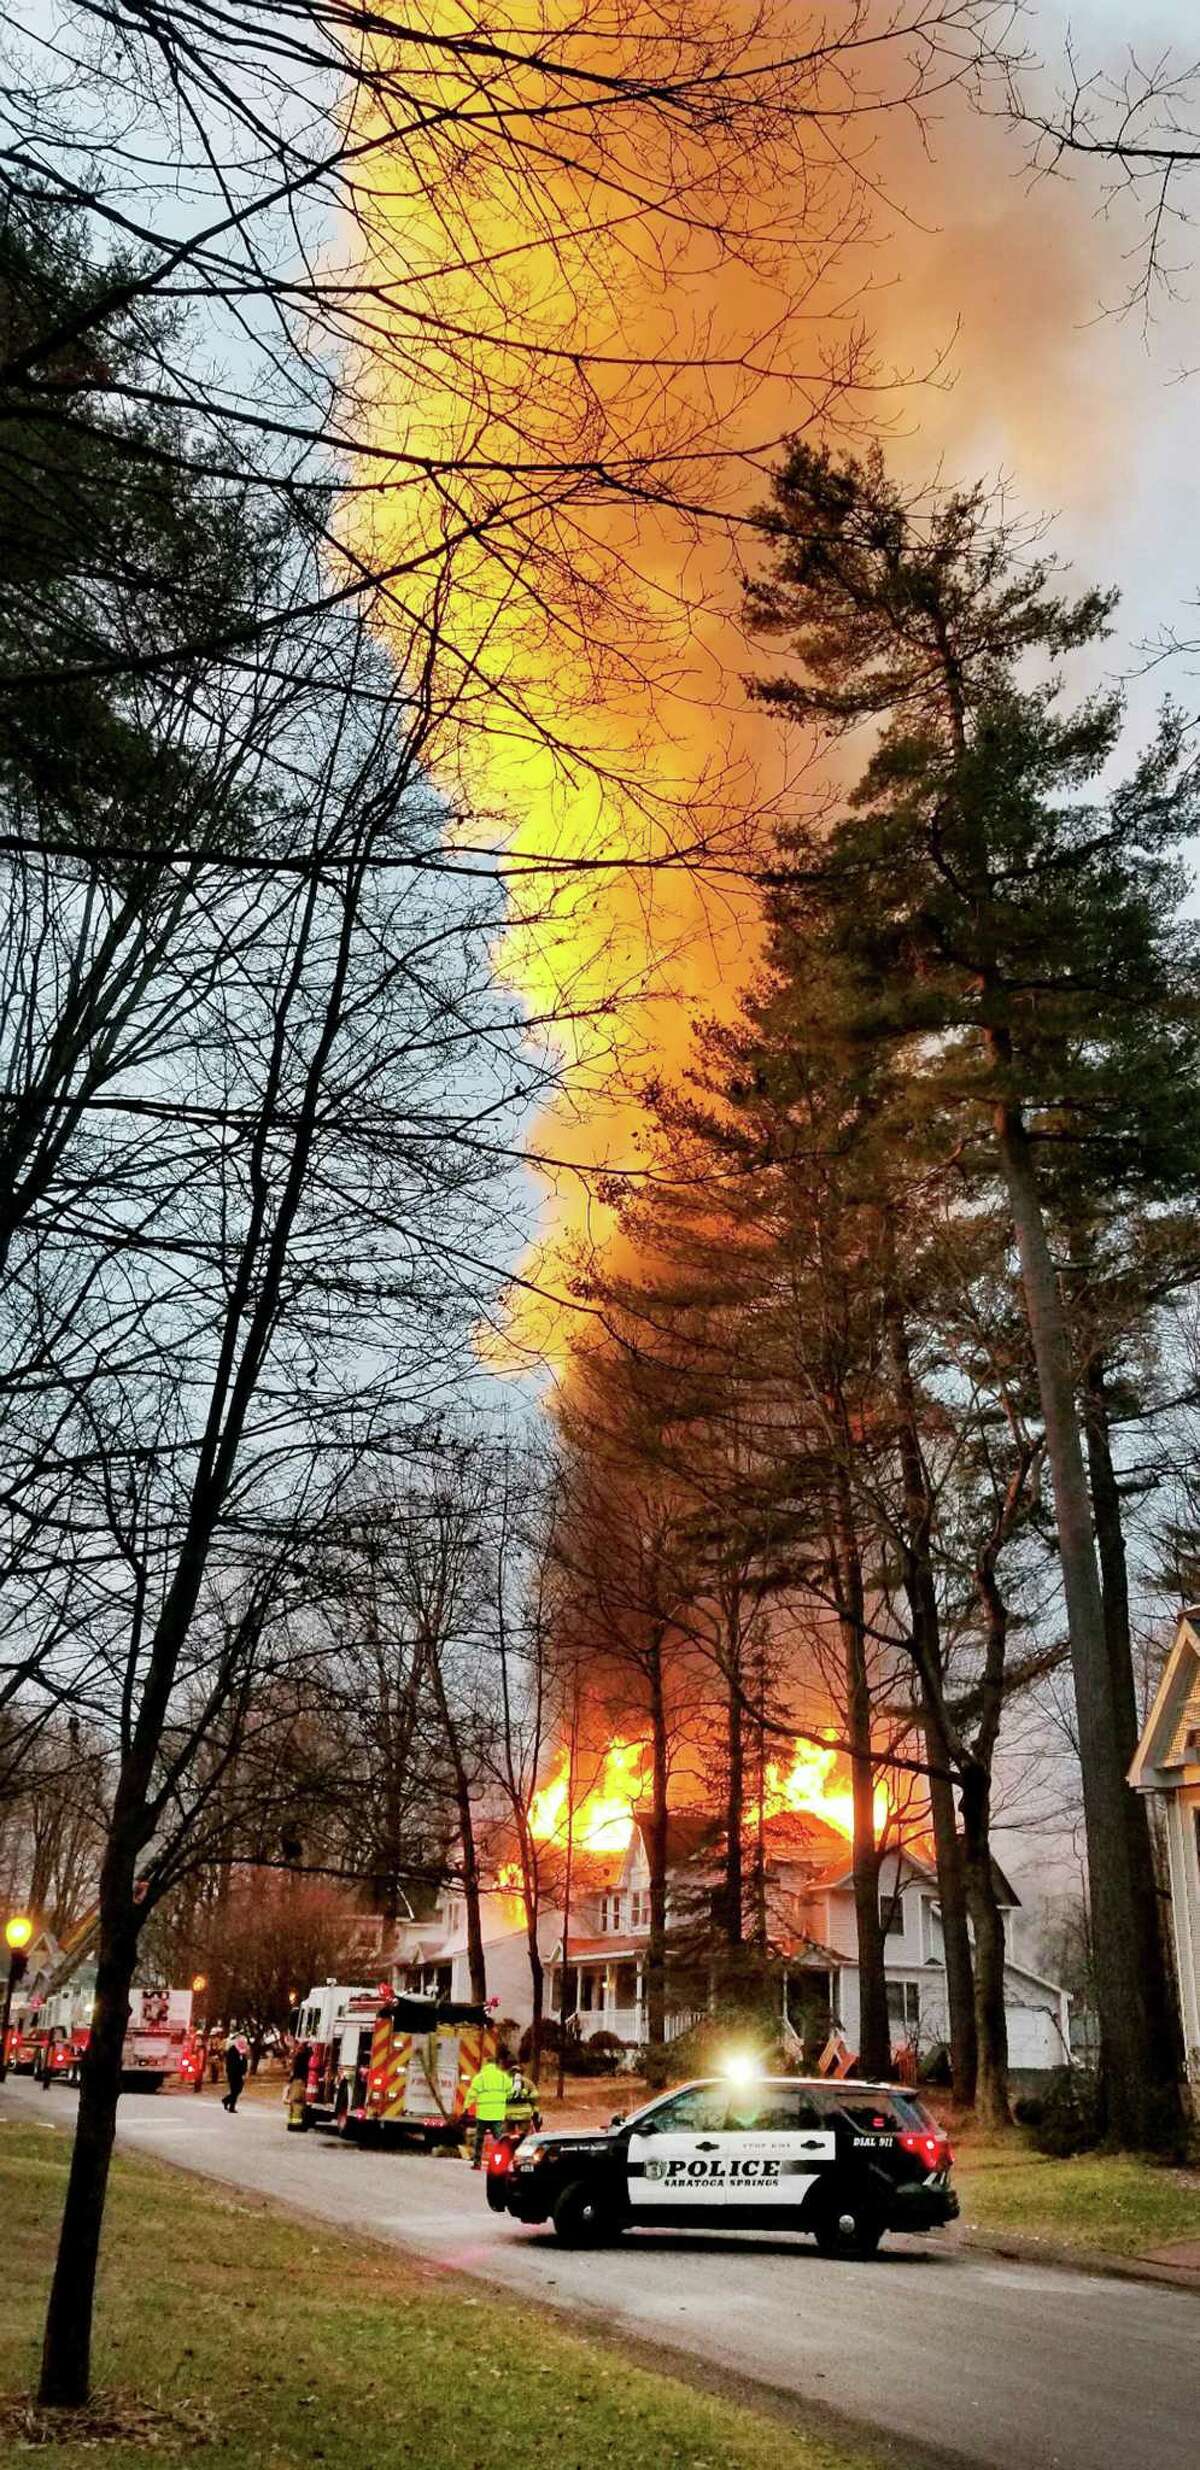 A column of fire rises from 23-27 Sarazen Way Wednesday Dec. 24, 2018 in Saratoga Springs, N.Y. (Special to the Times Union by Janine Rome)